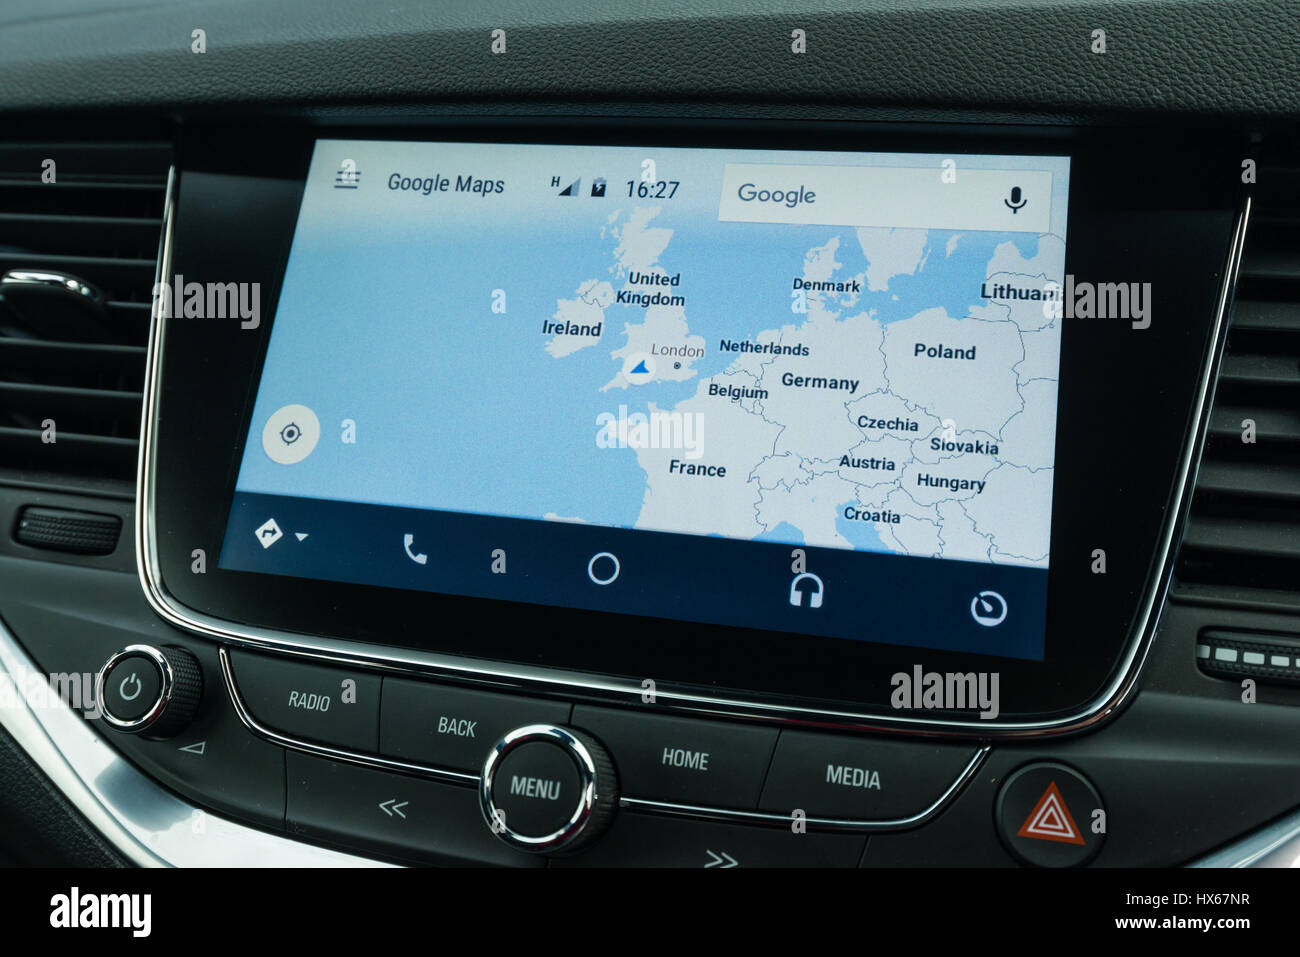 Android Auto Maps Navigation Car Vehicle Interface Stock Photo